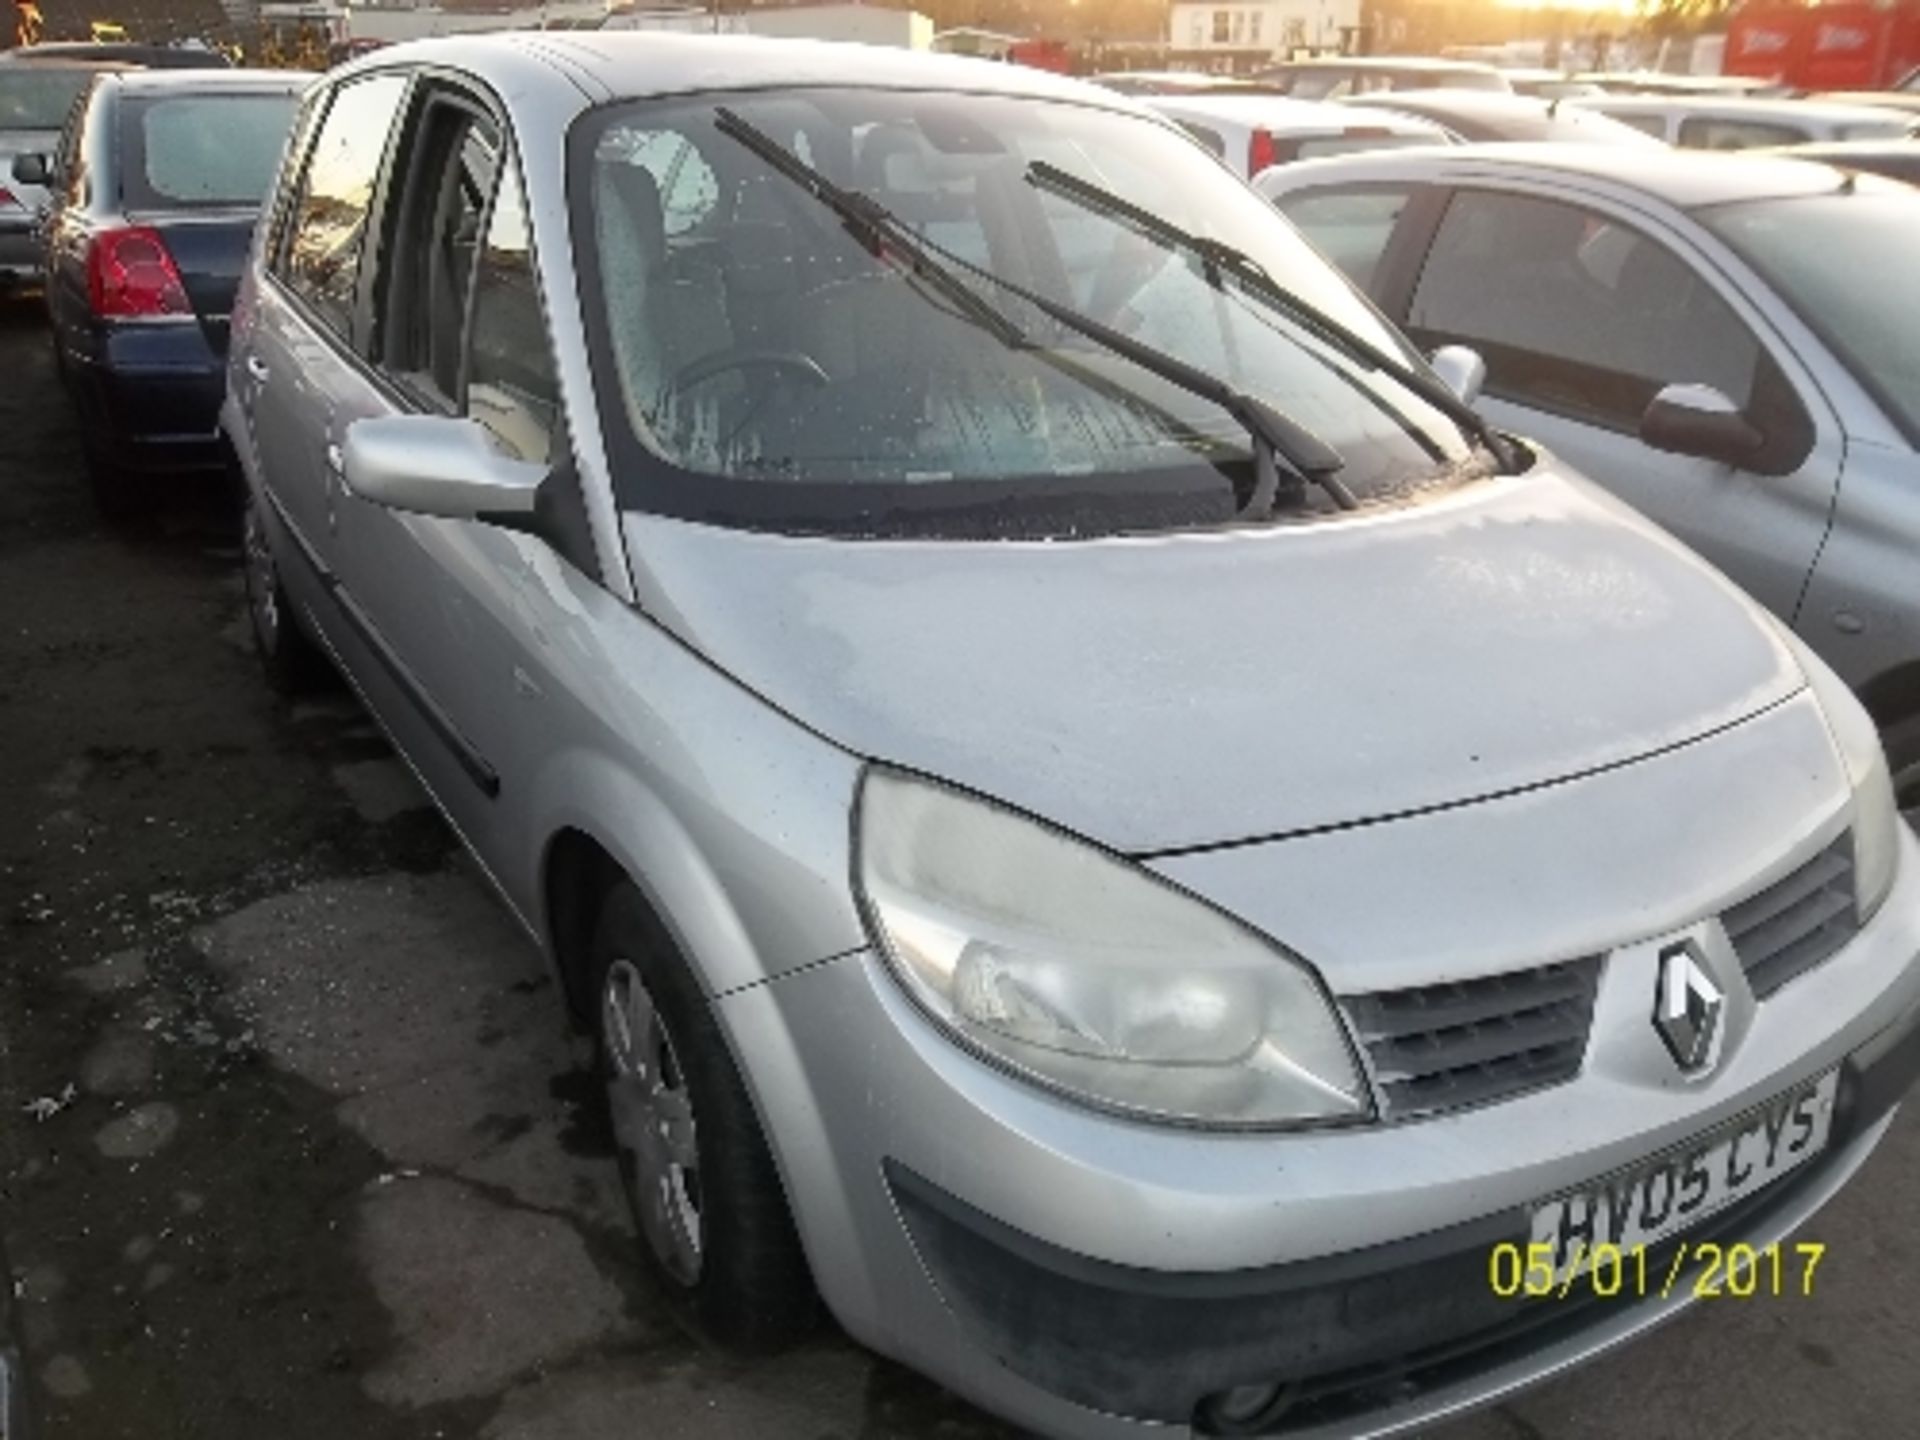 Renault Scenic Expression 16V - HV05 CYS Date of registration: 29.03.2005 1598cc, petrol, manual, - Image 2 of 4